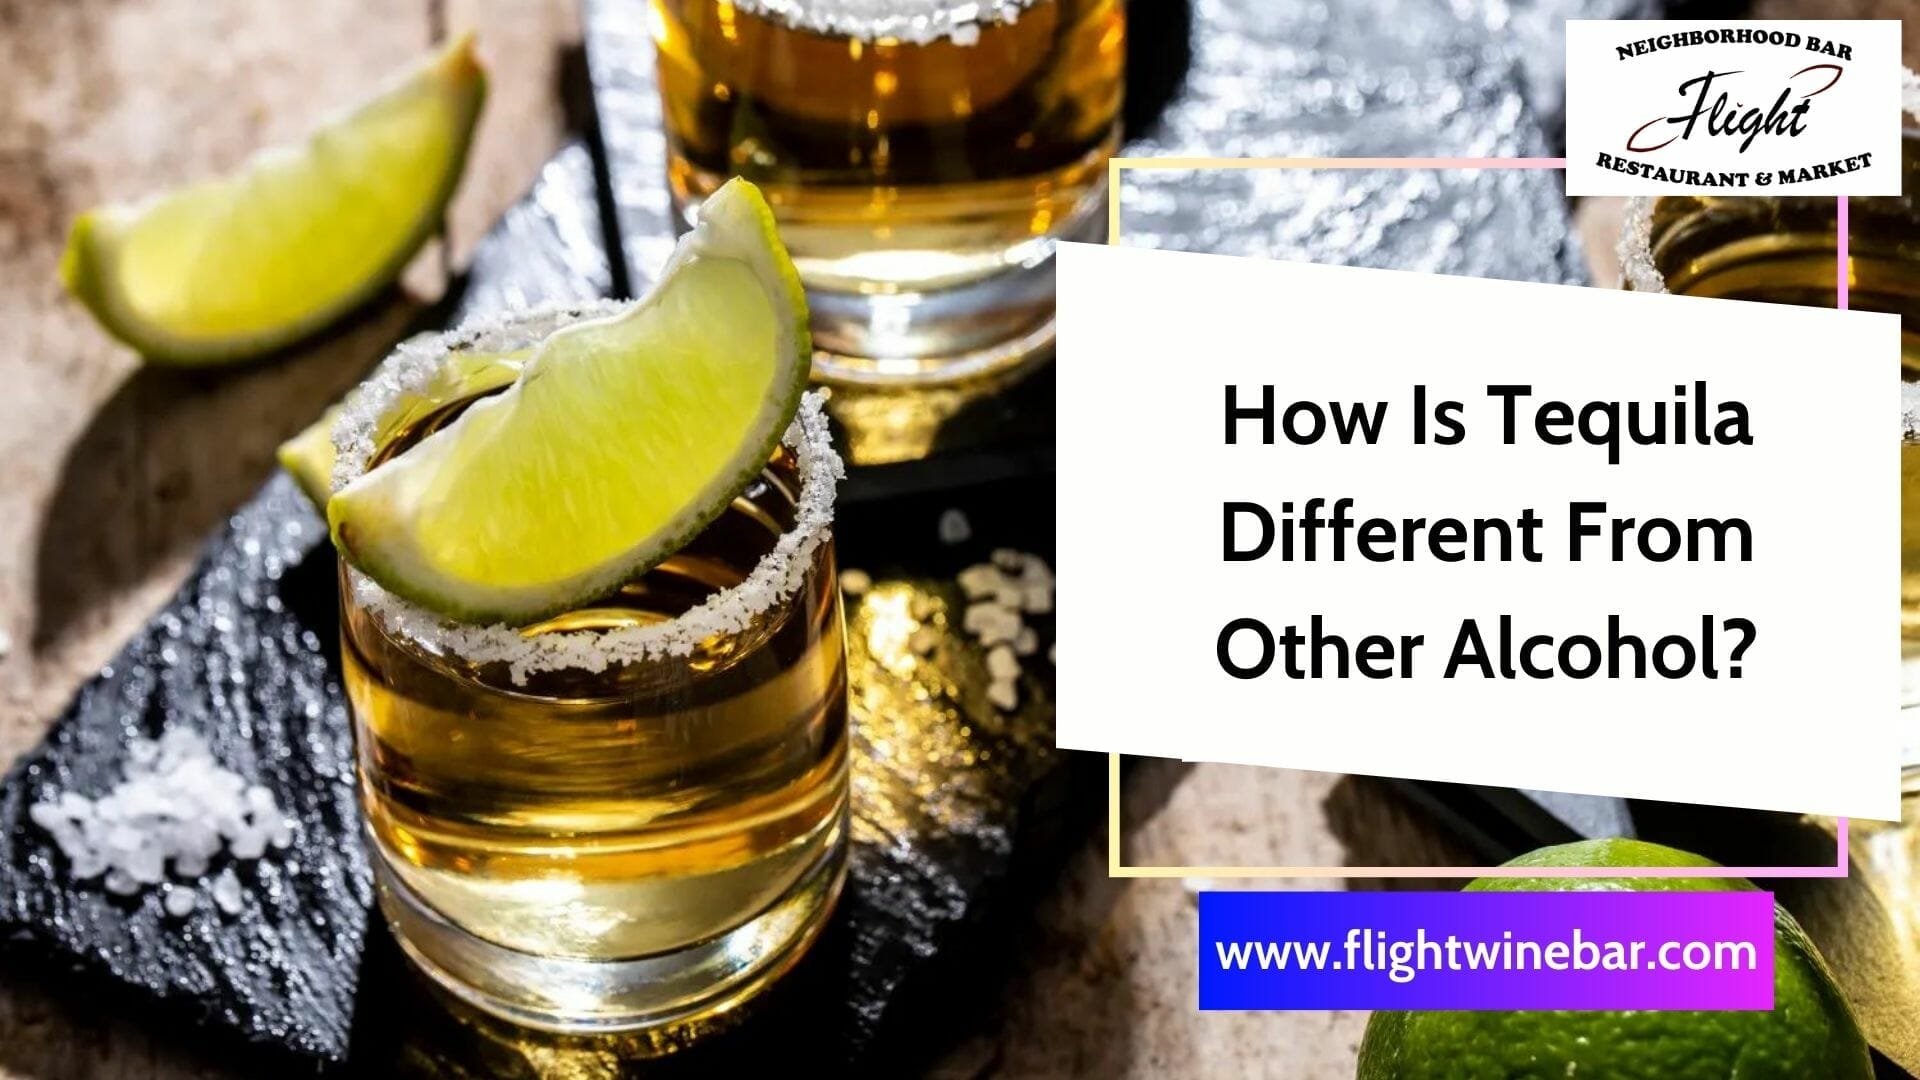 How Is Tequila Different From Other Alcohol